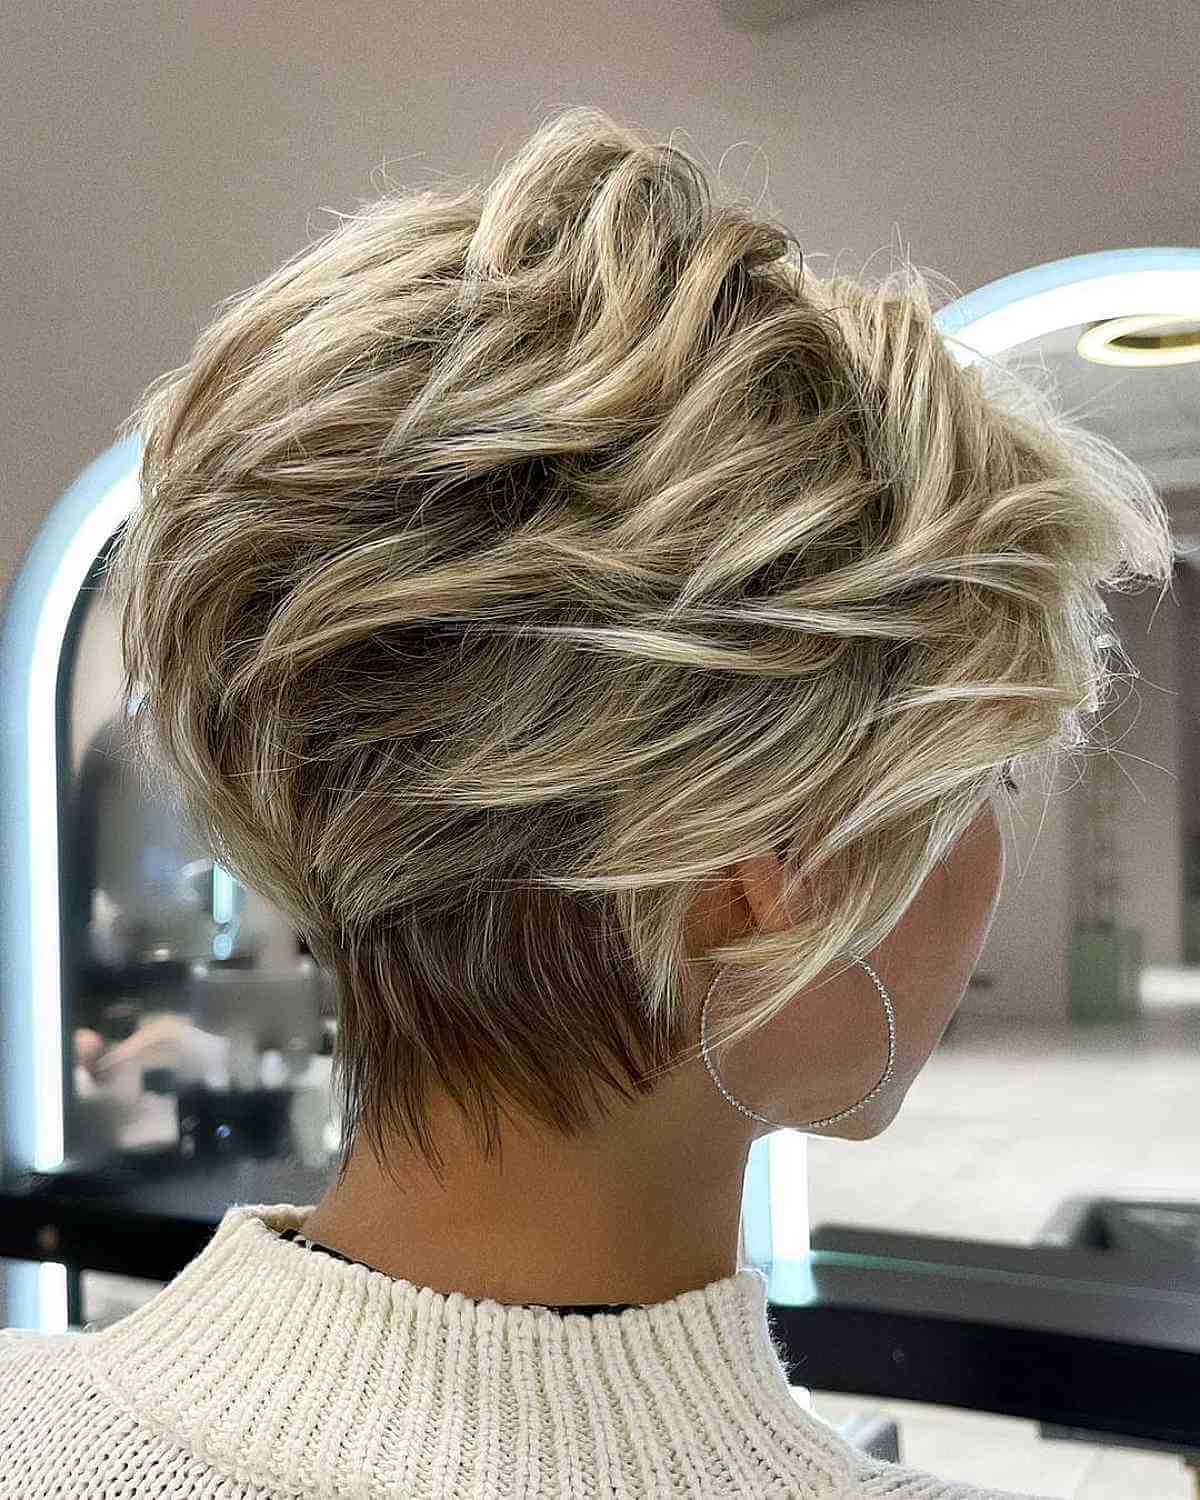 50 Top Short Hairstyles for Thick Hair to Be More Manageable